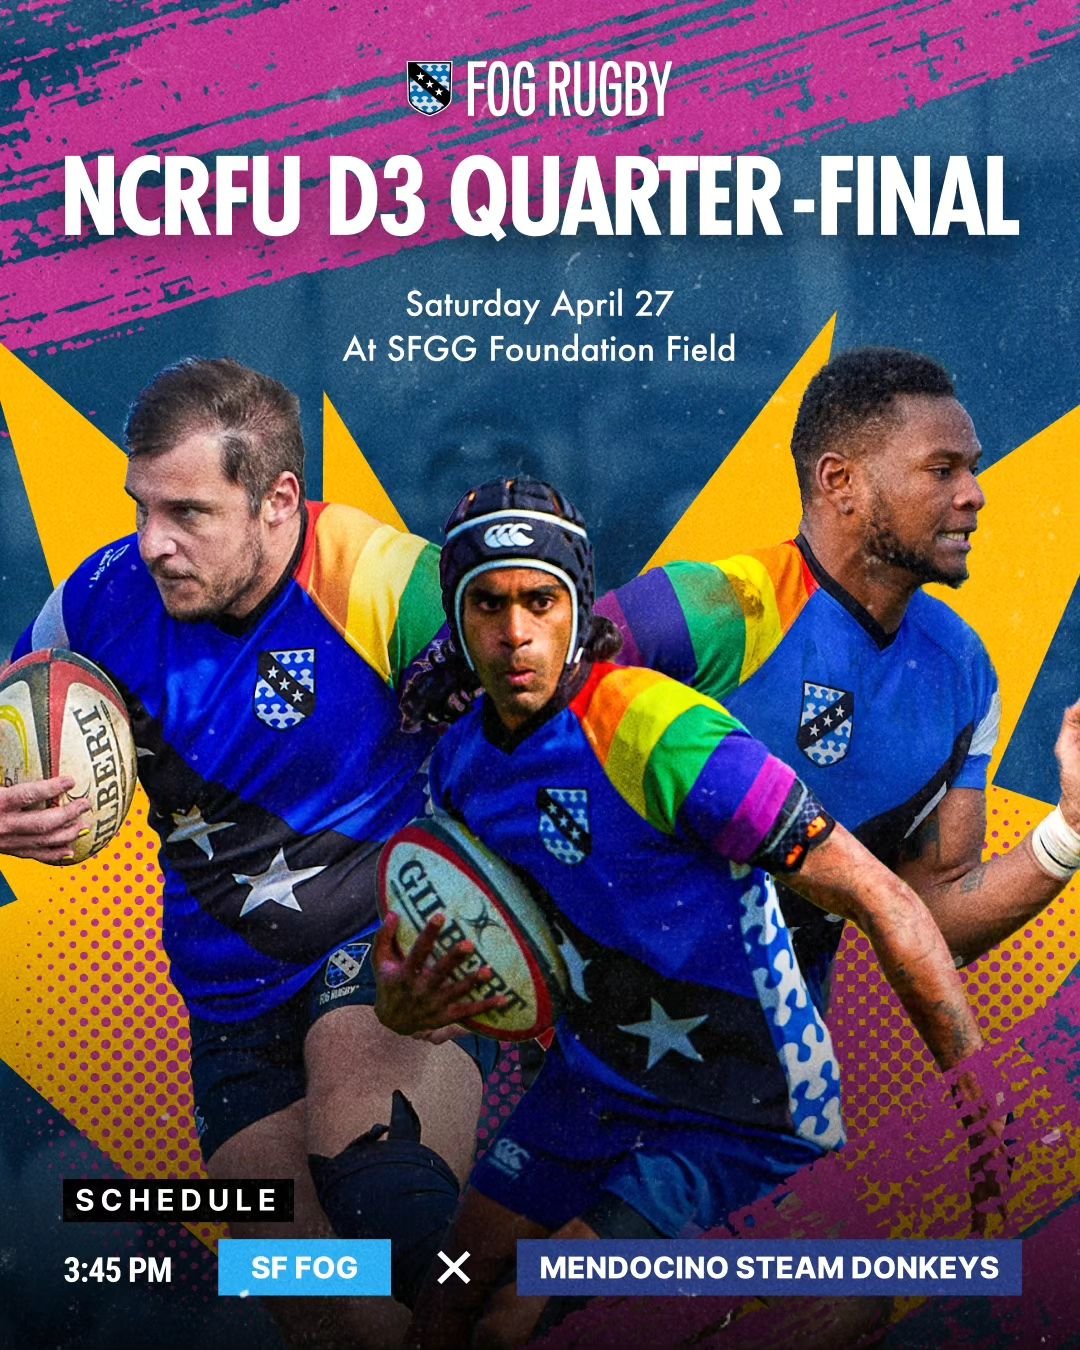 Come cheer on the Fog as we begin the NCRFU D3 Play-Offs! We'll be hosting the Quarterfinals match against the Mendocino Steam Donkeys, so come show your support and help us win the inaugural D3 Tom Casey Cup!

Where? 13th St Avenue H, San Francisco 